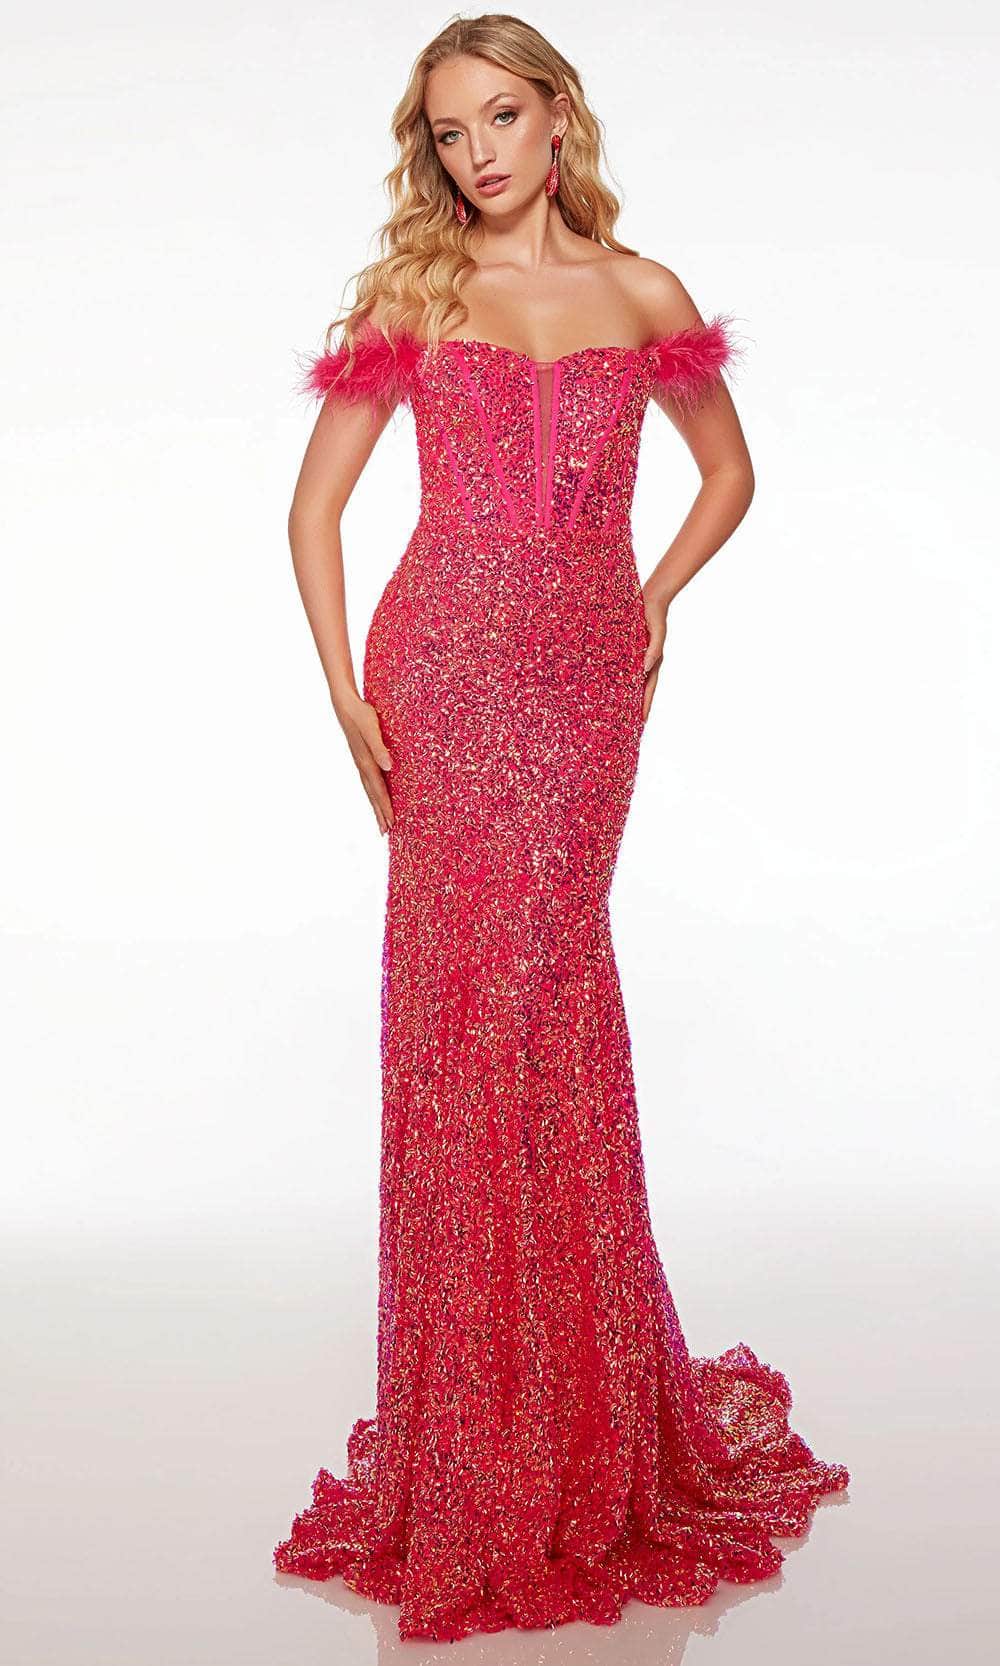 Image of Alyce Paris 61502 - Detachable Feather Sleeve Prom Gown